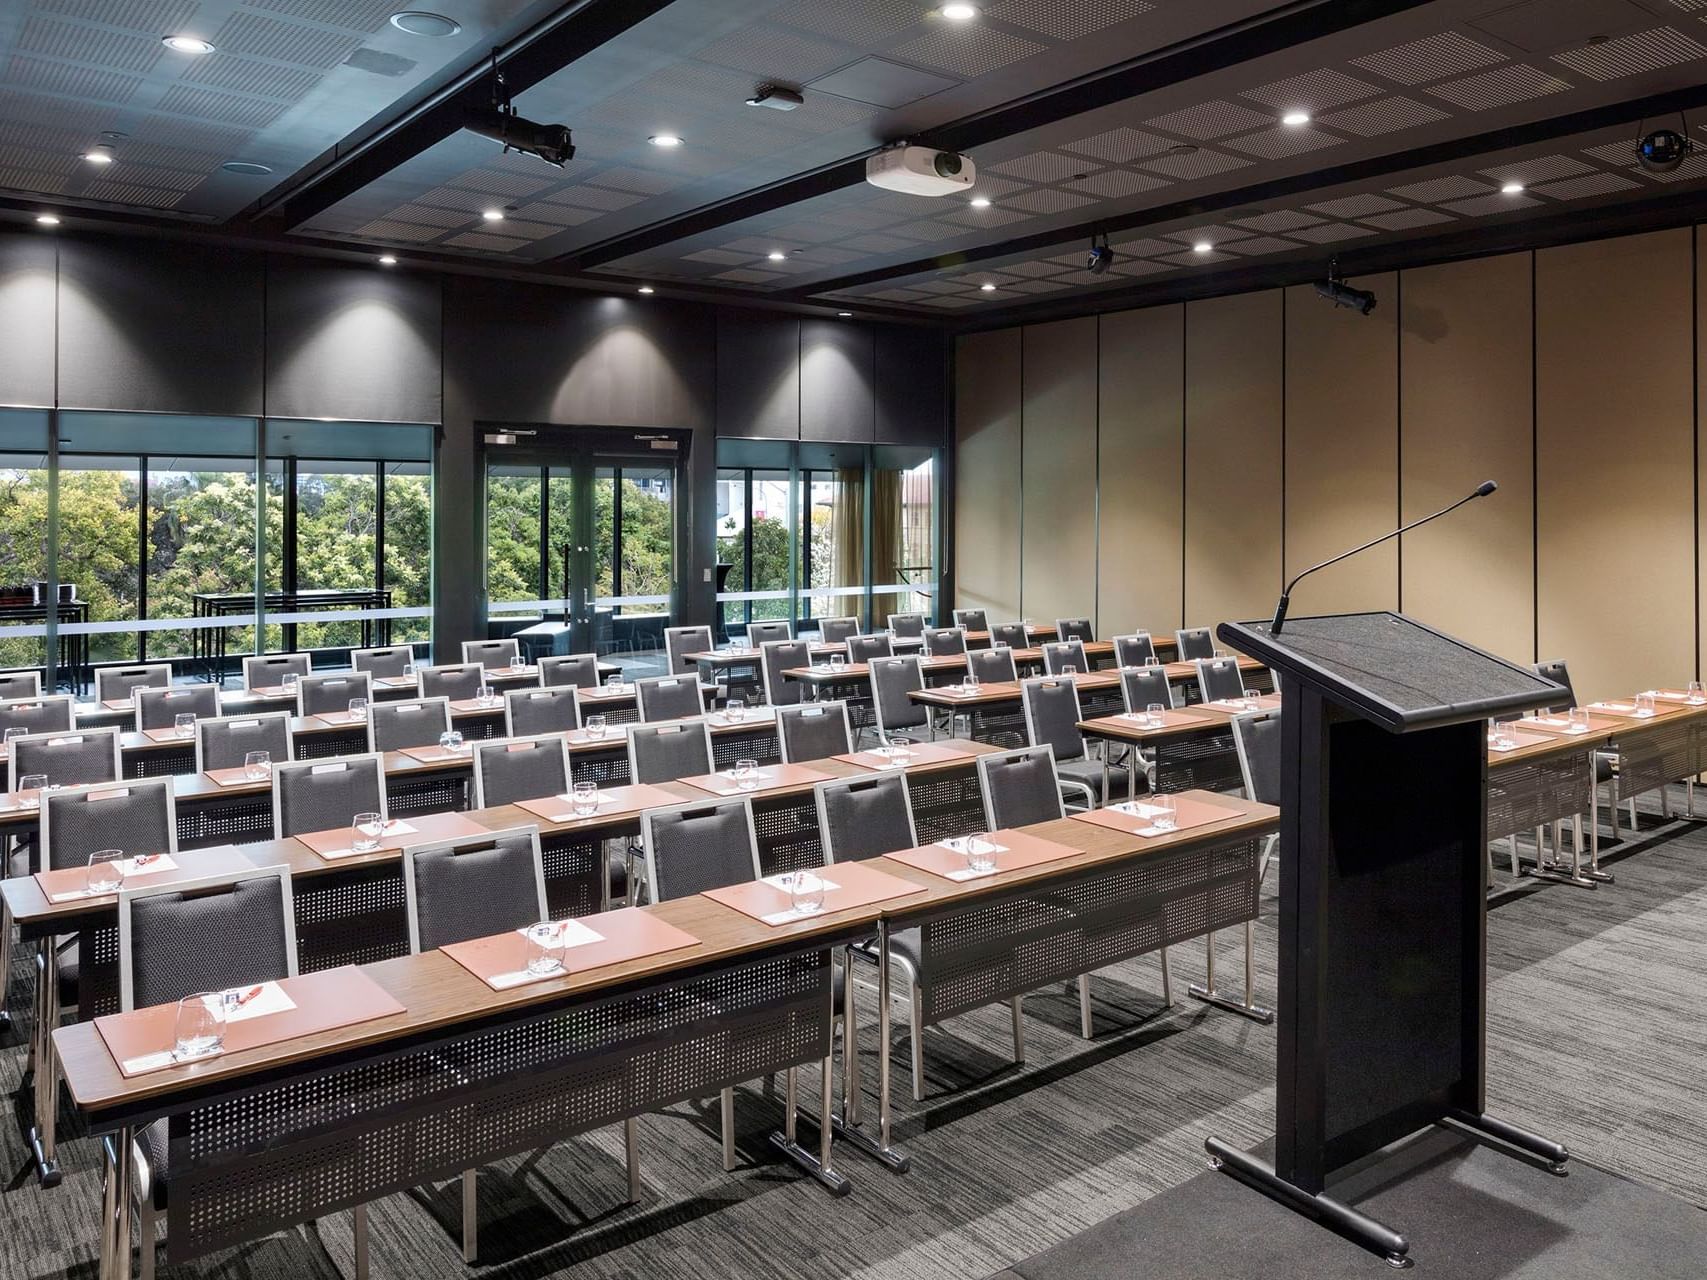 Classroom set-up in Terrace Room at Grand Chancellor Brisbane